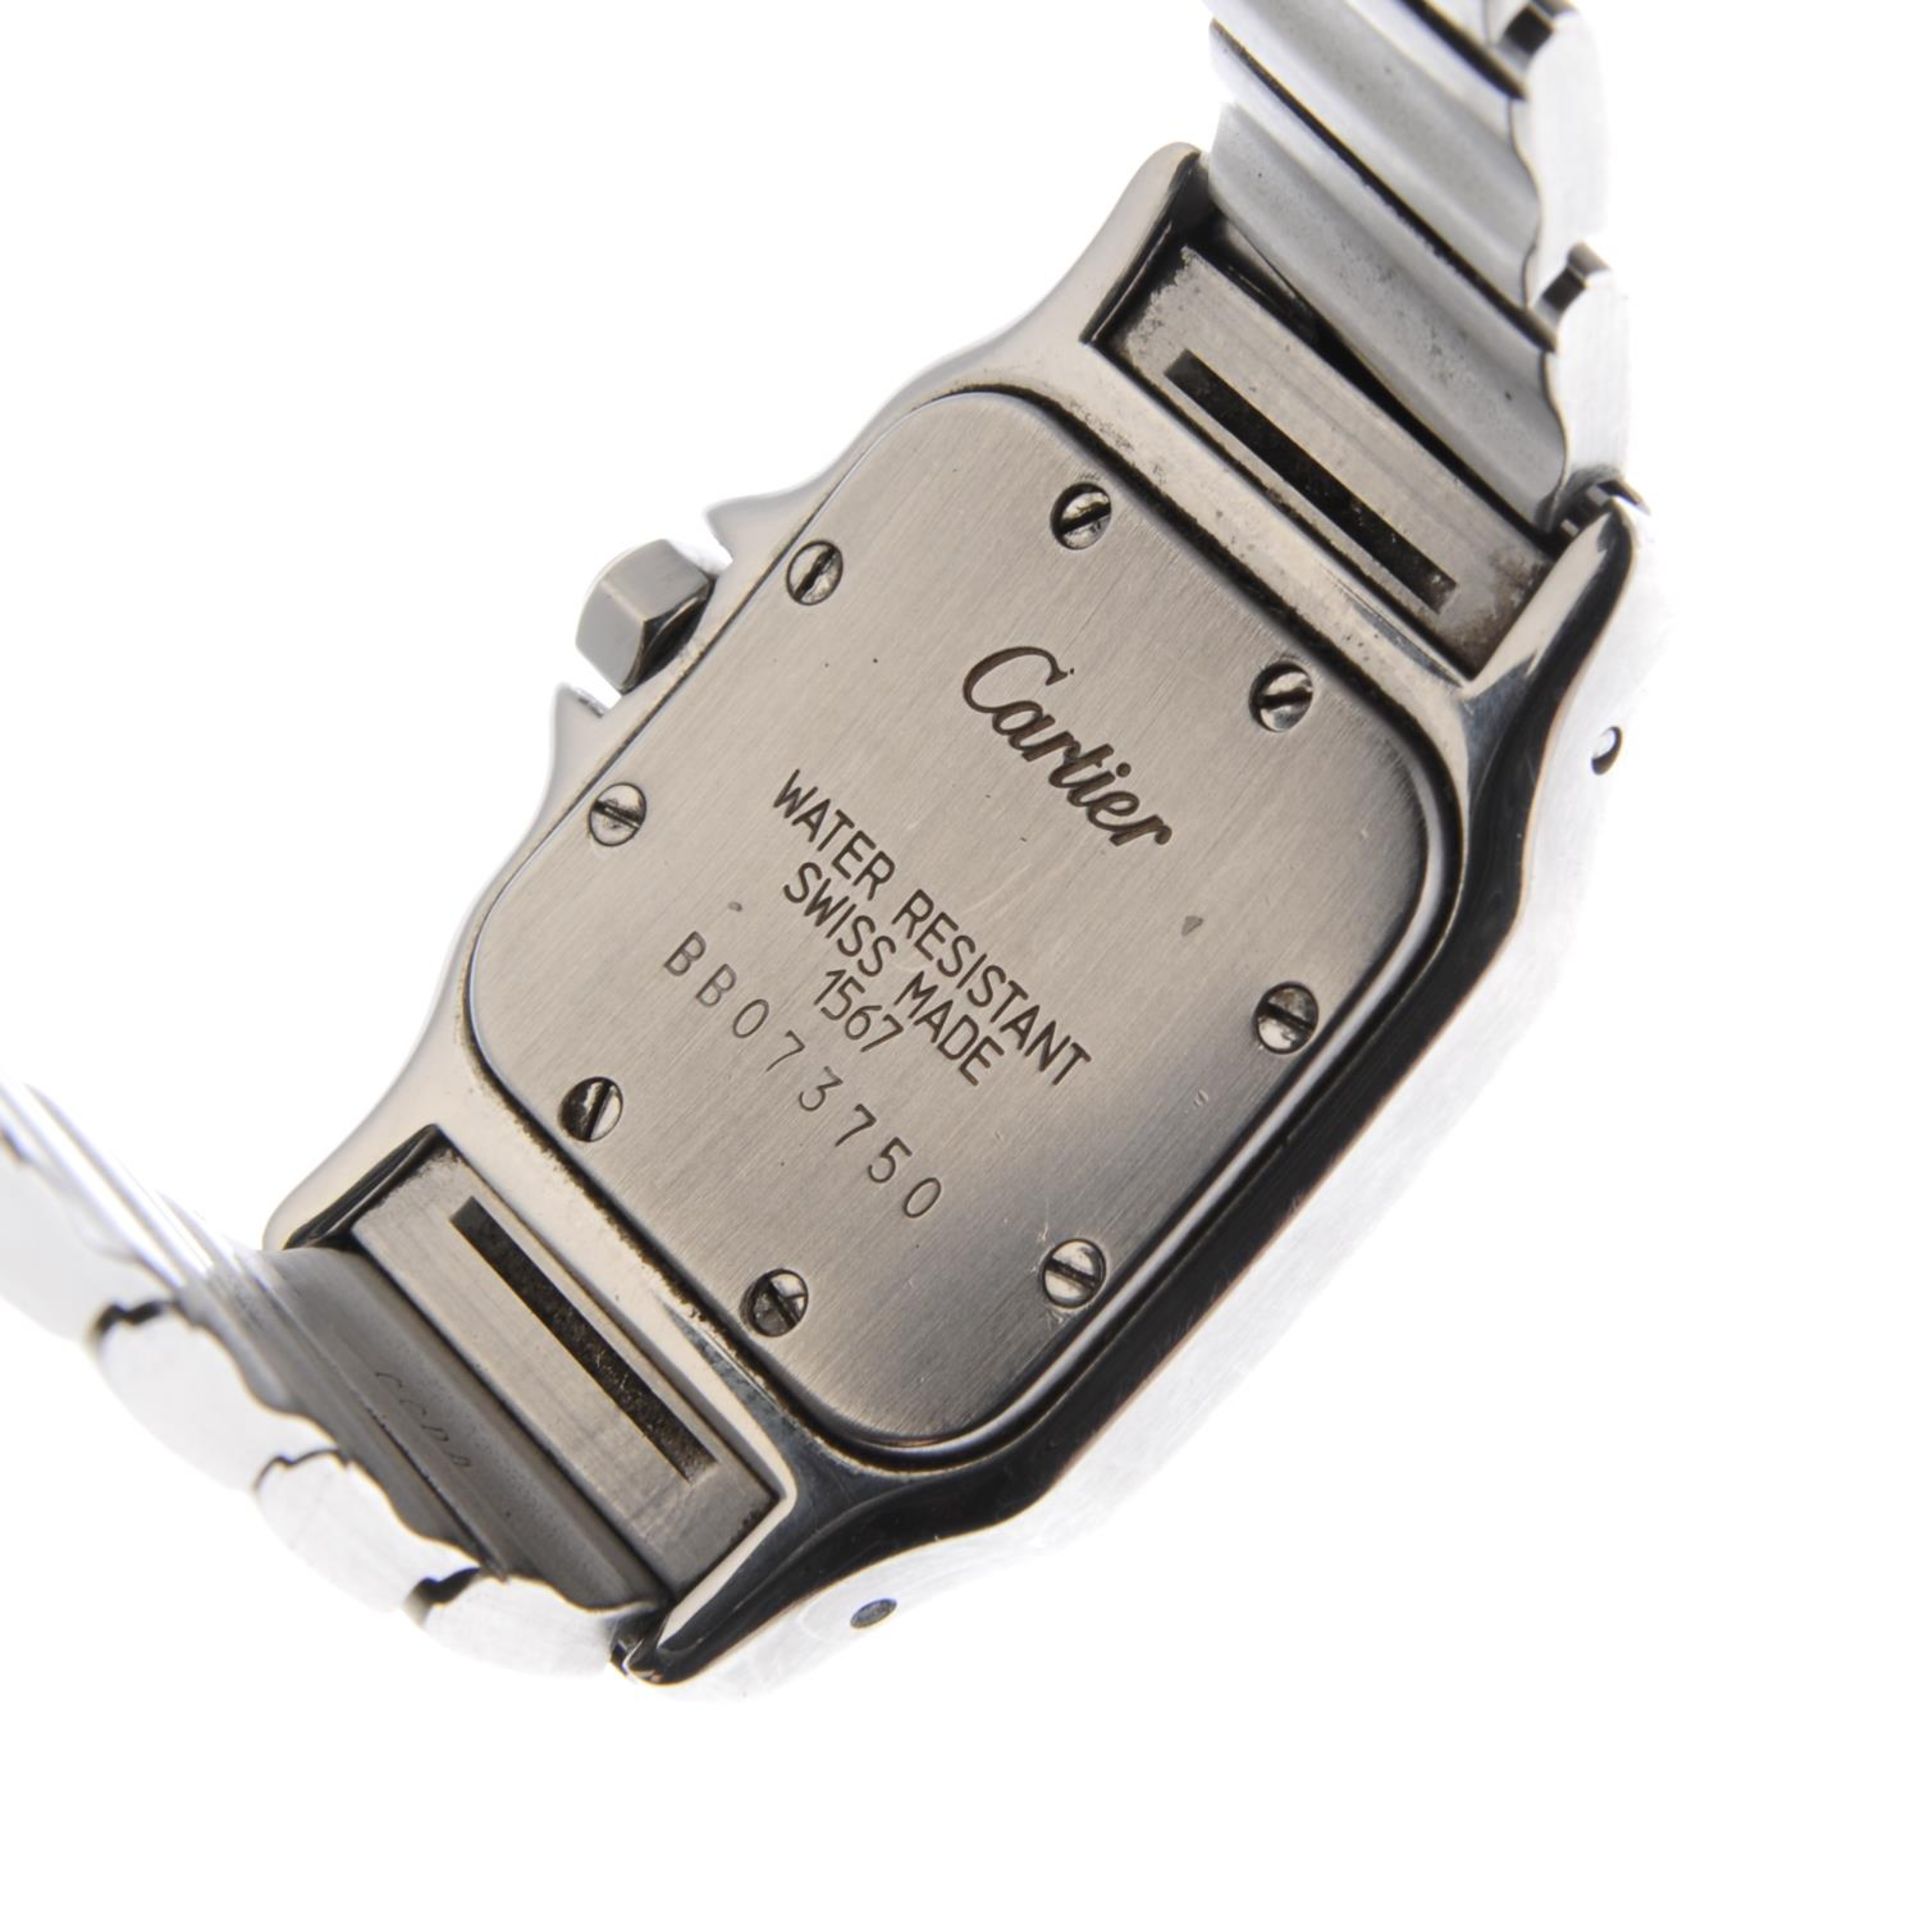 CARTIER - a lady's Santos bracelet watch. Stainless steel case with yellow metal bezel. Reference - Image 5 of 7